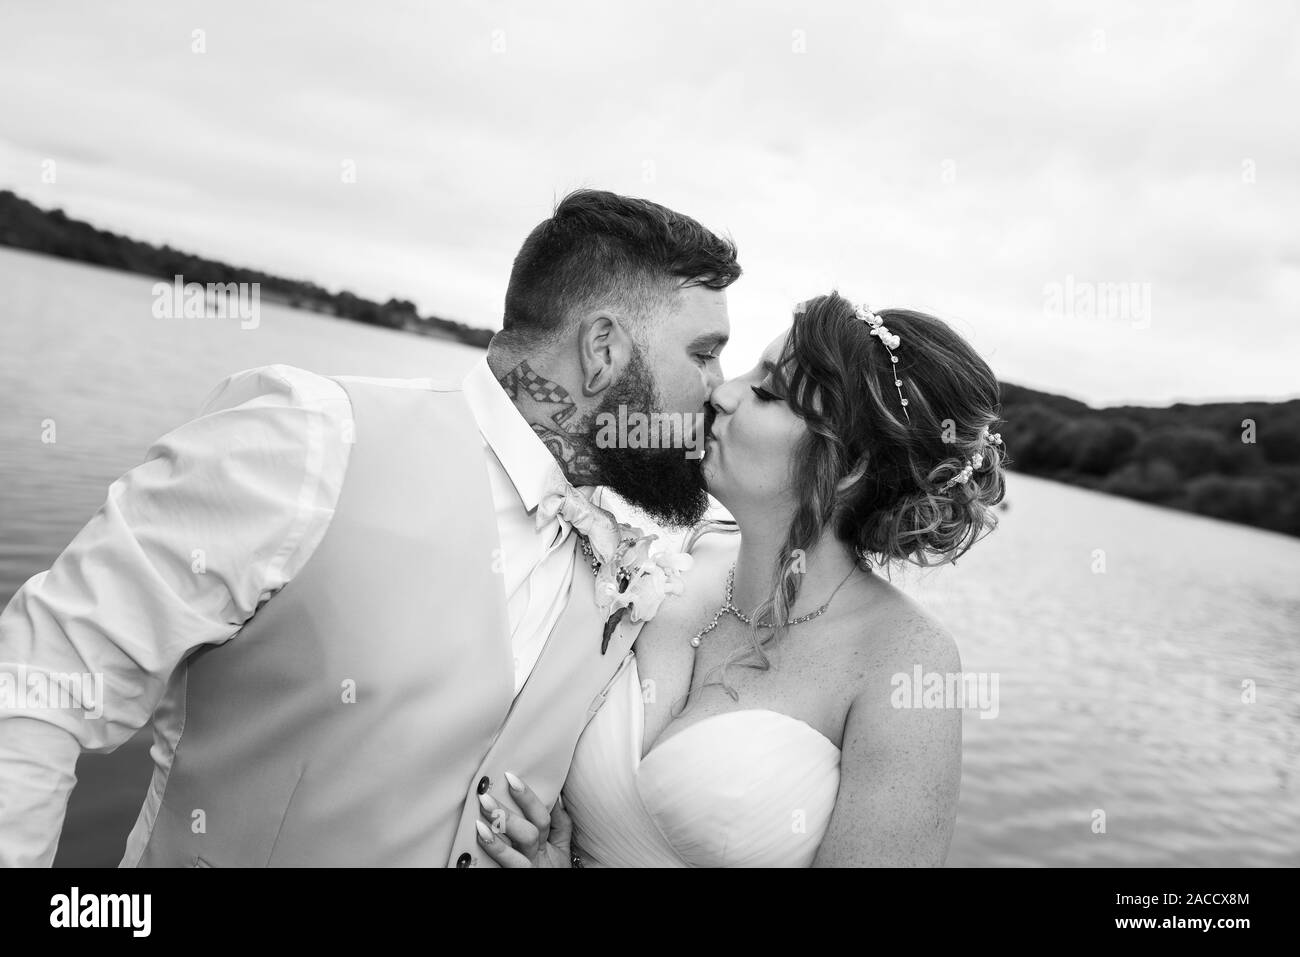 A bride and groom kissing on their big day, celebrating love and happiness and their future together Stock Photo